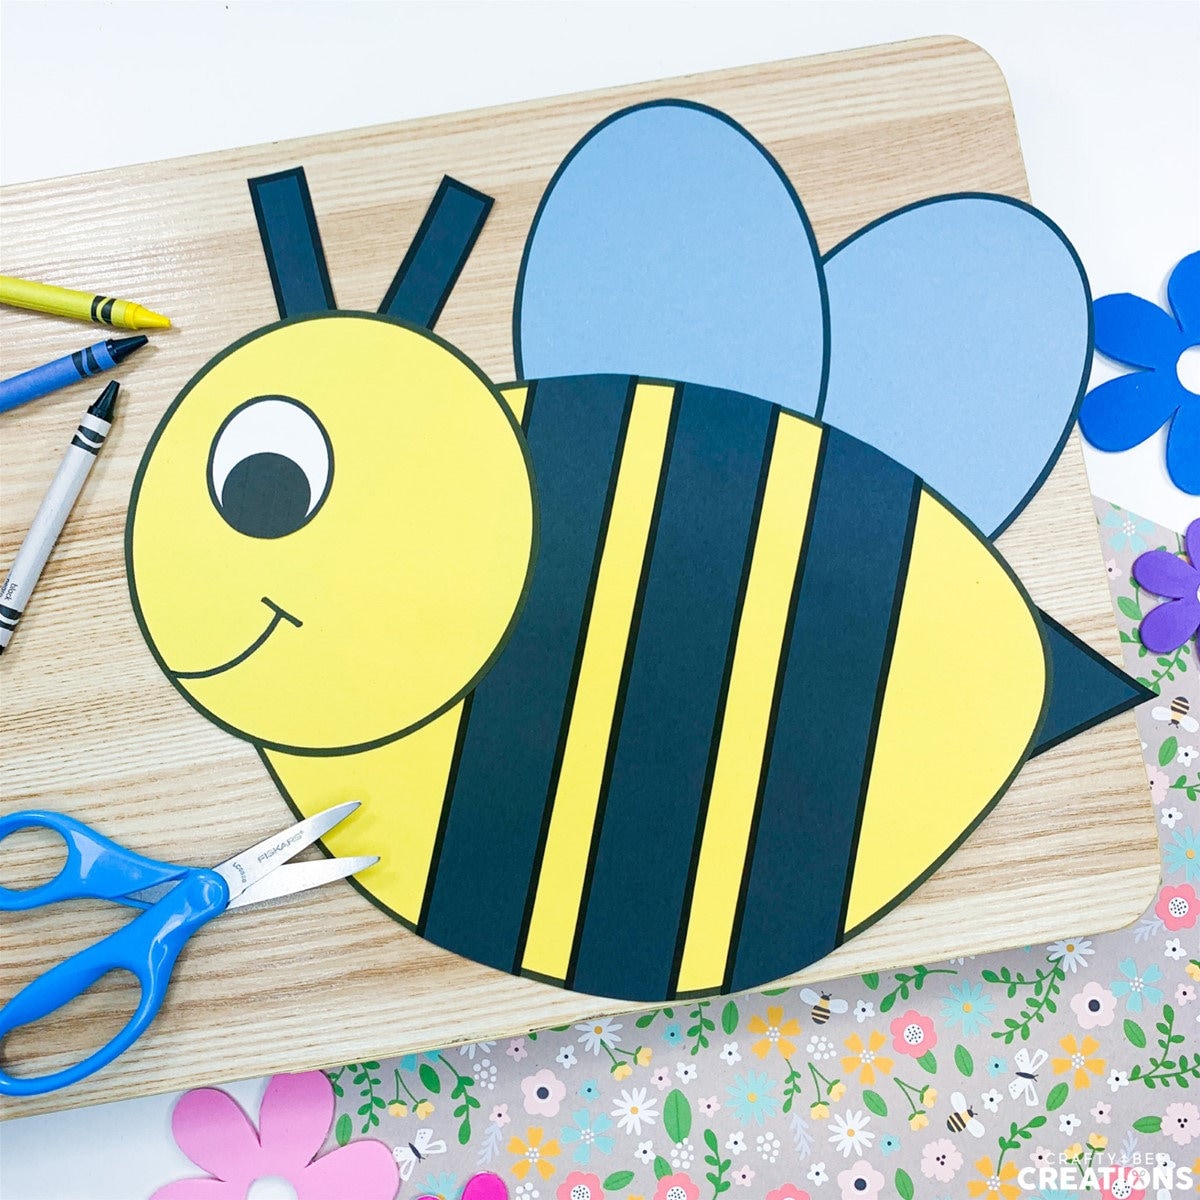 DIY Craft - Decorative Paper Mache Letters - Tutorials by Crafty Ladybug  Creations 